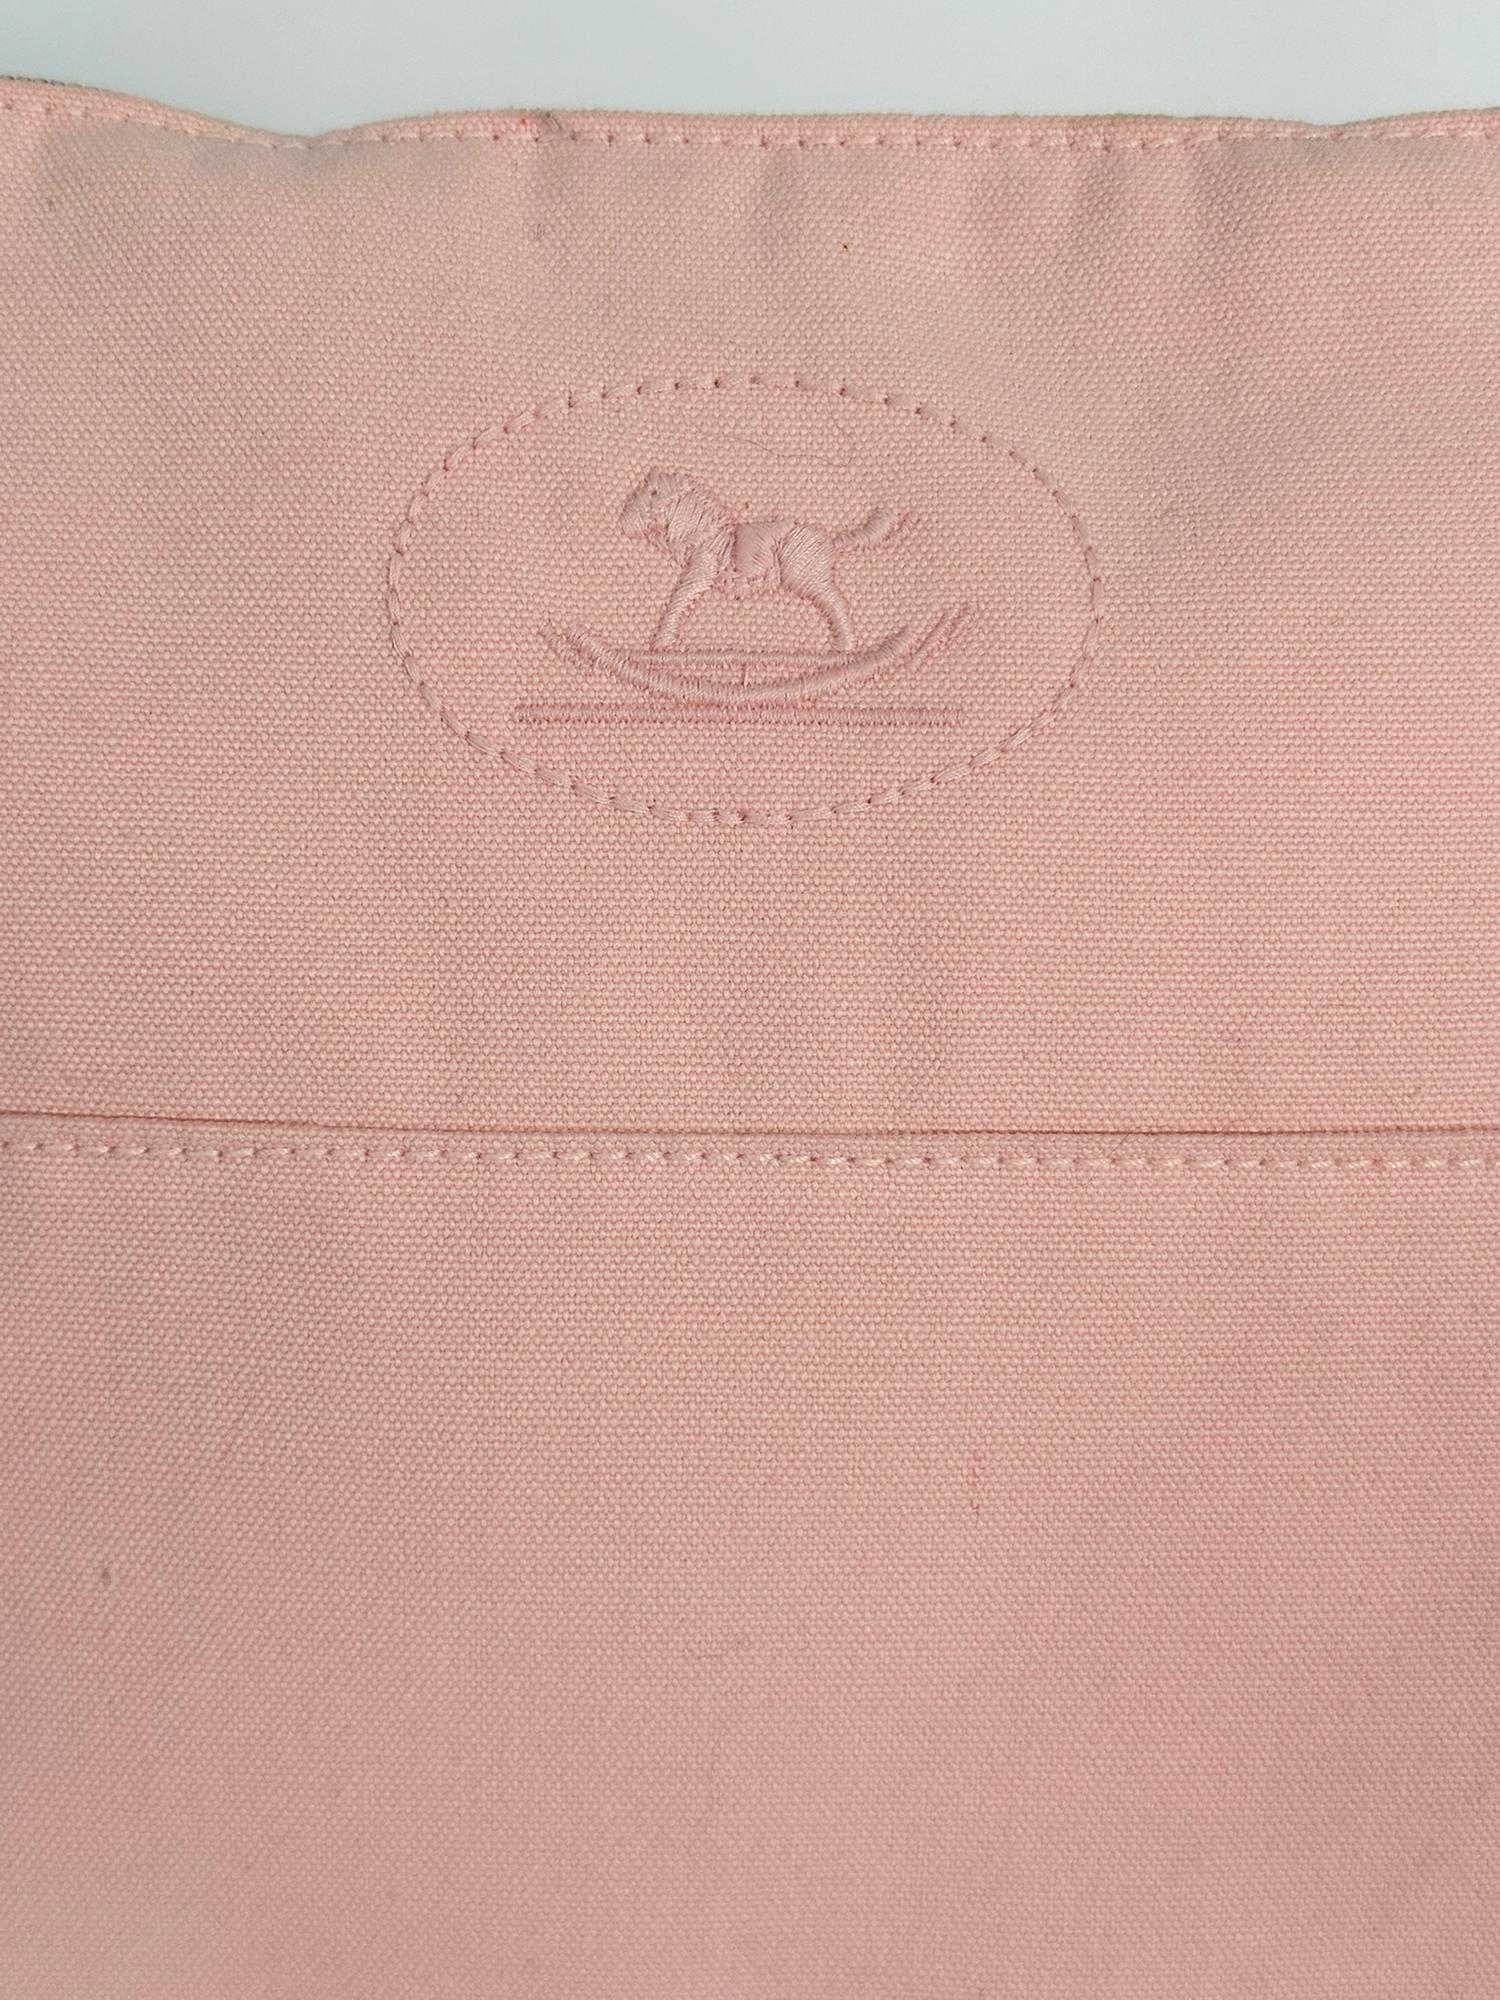 Hermes Bolide Soft Pink Canvas Rocking Horse Embroidery Large Cosmetic Bag 2021 In Good Condition For Sale In West Palm Beach, FL